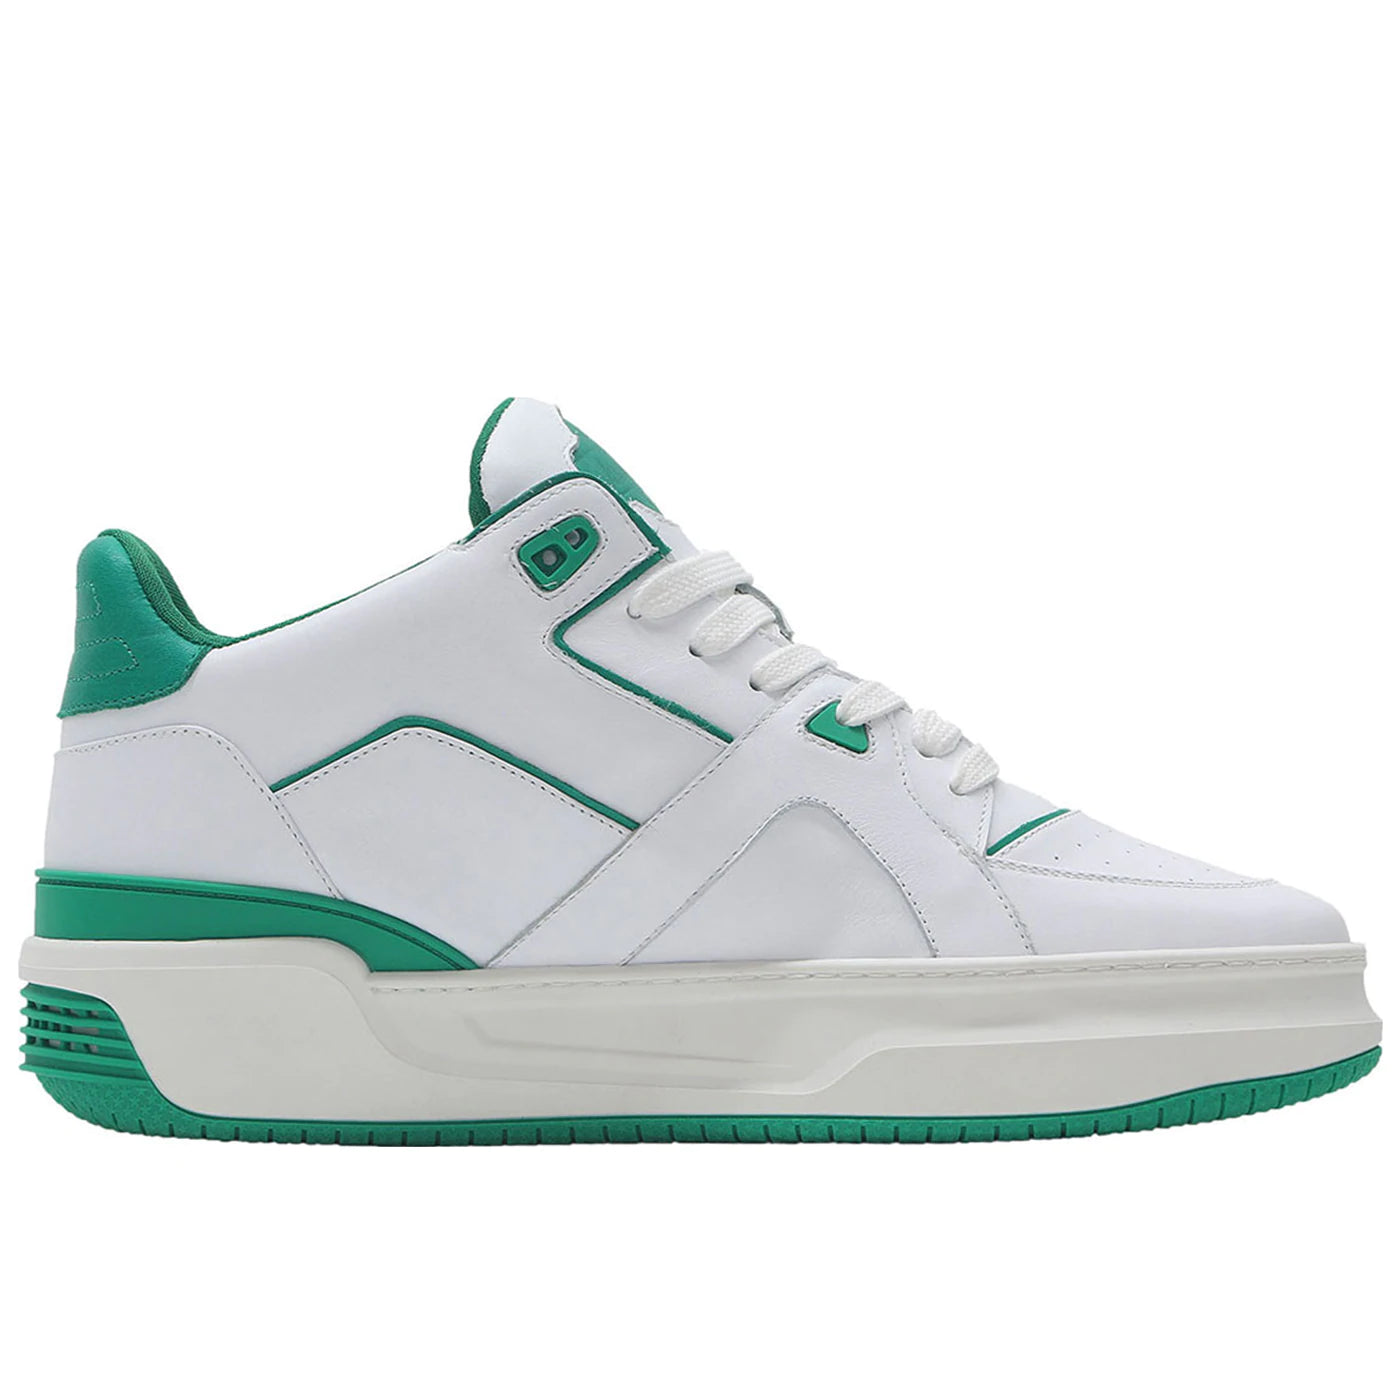 LV Trainers - Luxury Green